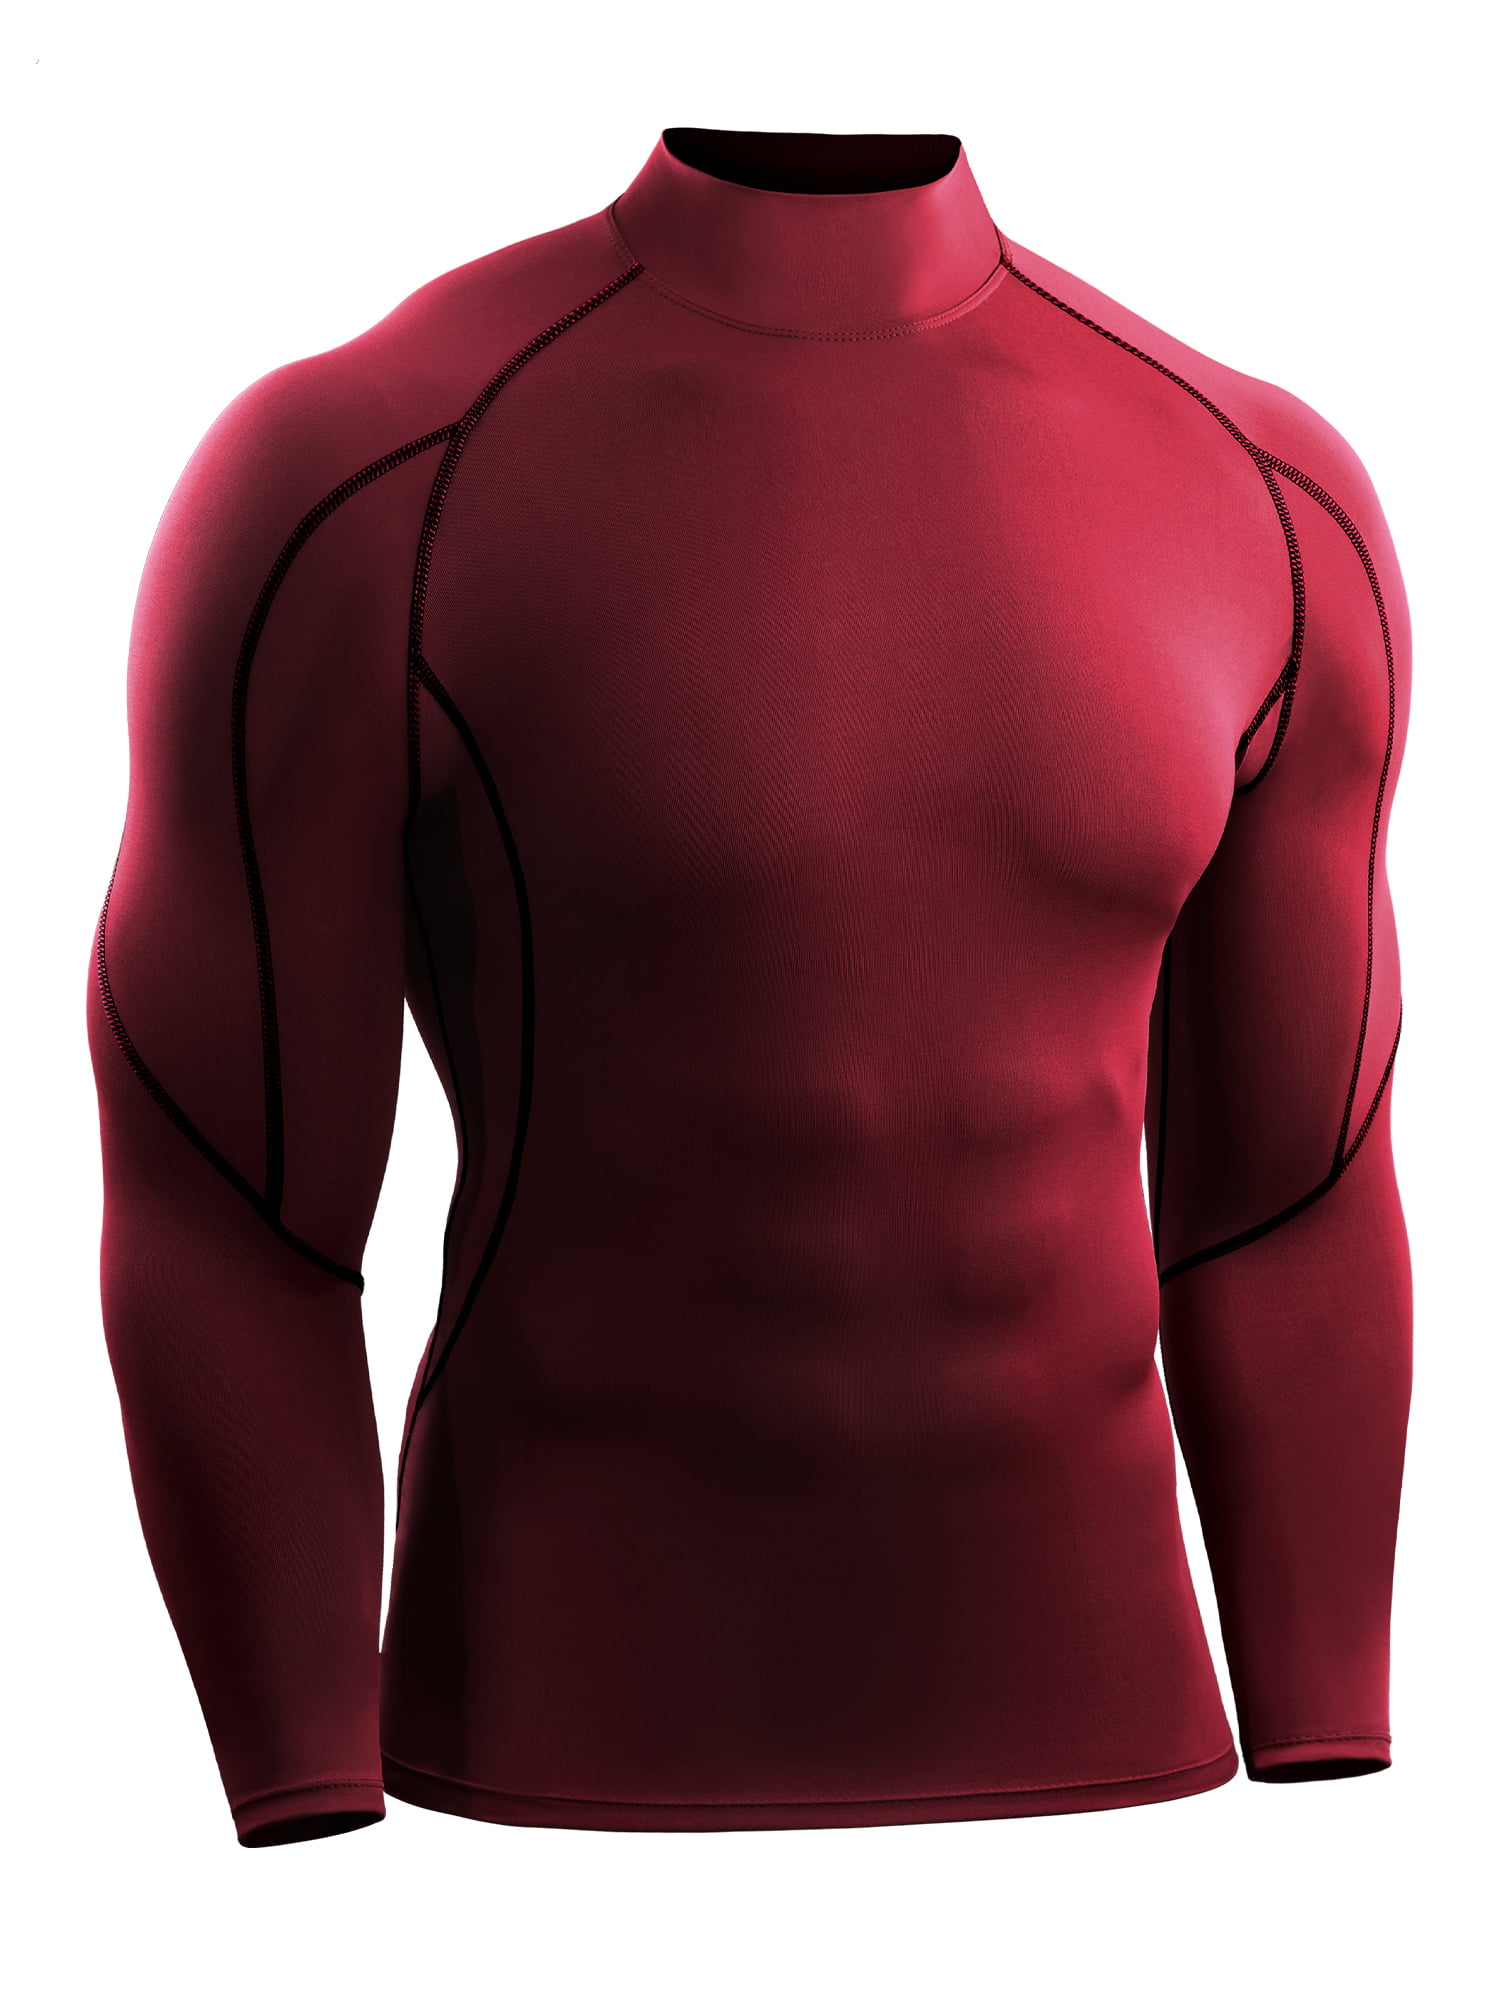 Men Sports Gym Compression Under Base Layer Gym Thermal Armour Tights Top Shirt 